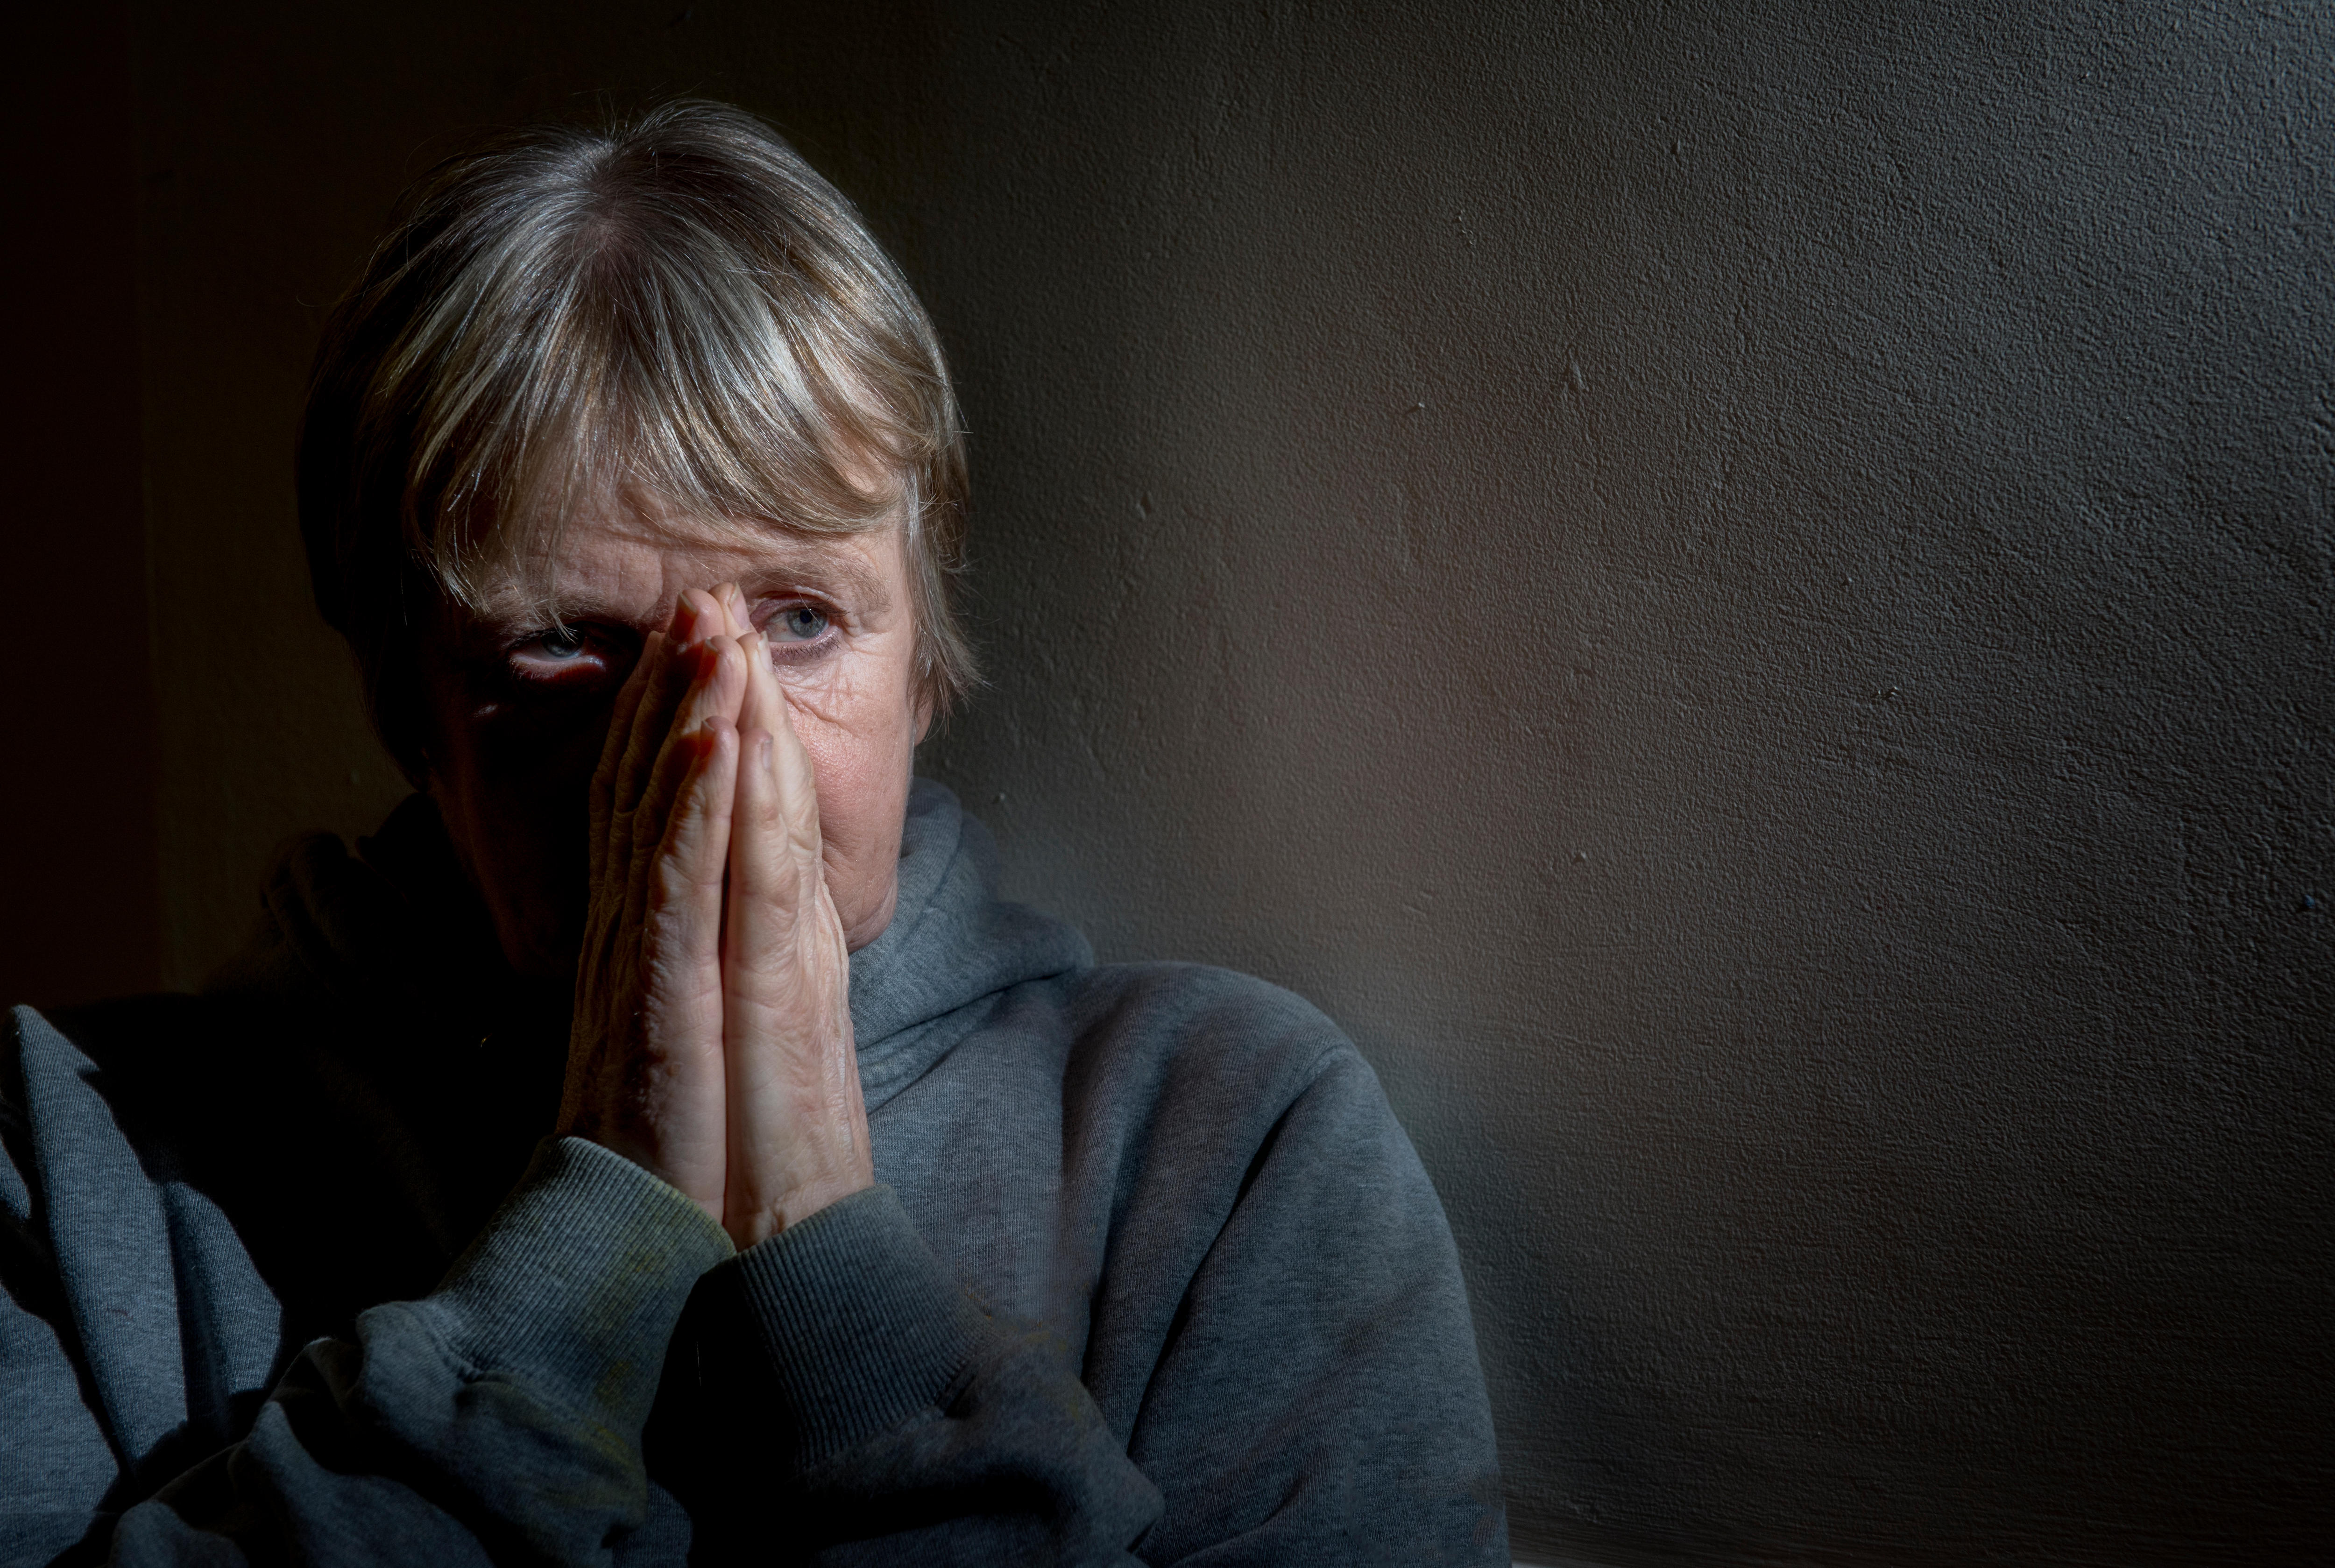 Women over 45 are at growing risk of experiencing homelessness